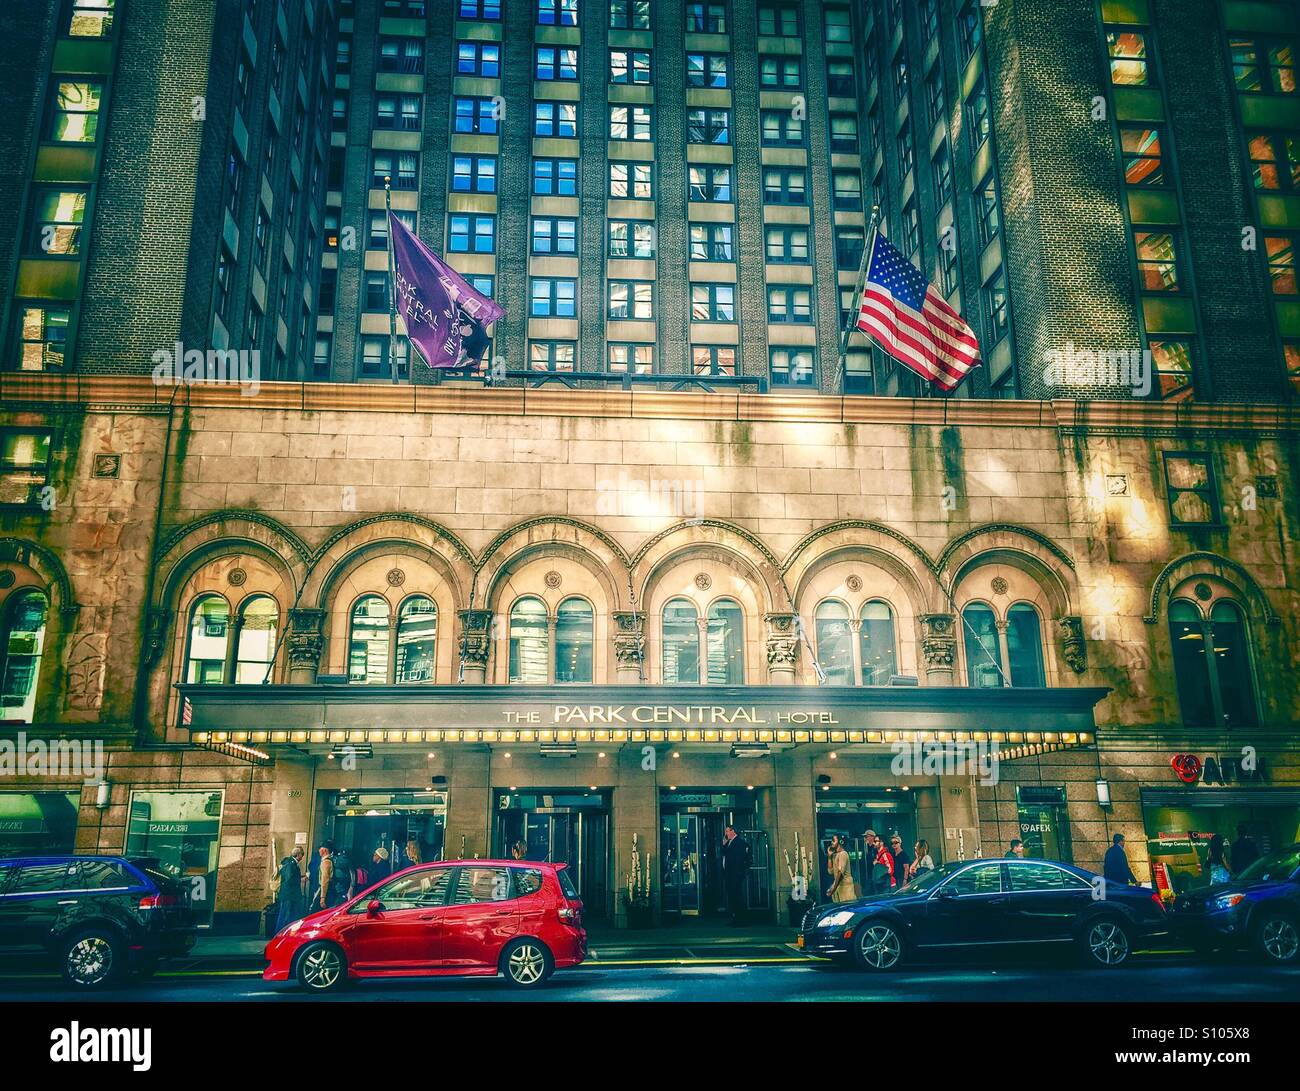 The Park Central Hotel, New York City Stock Photo